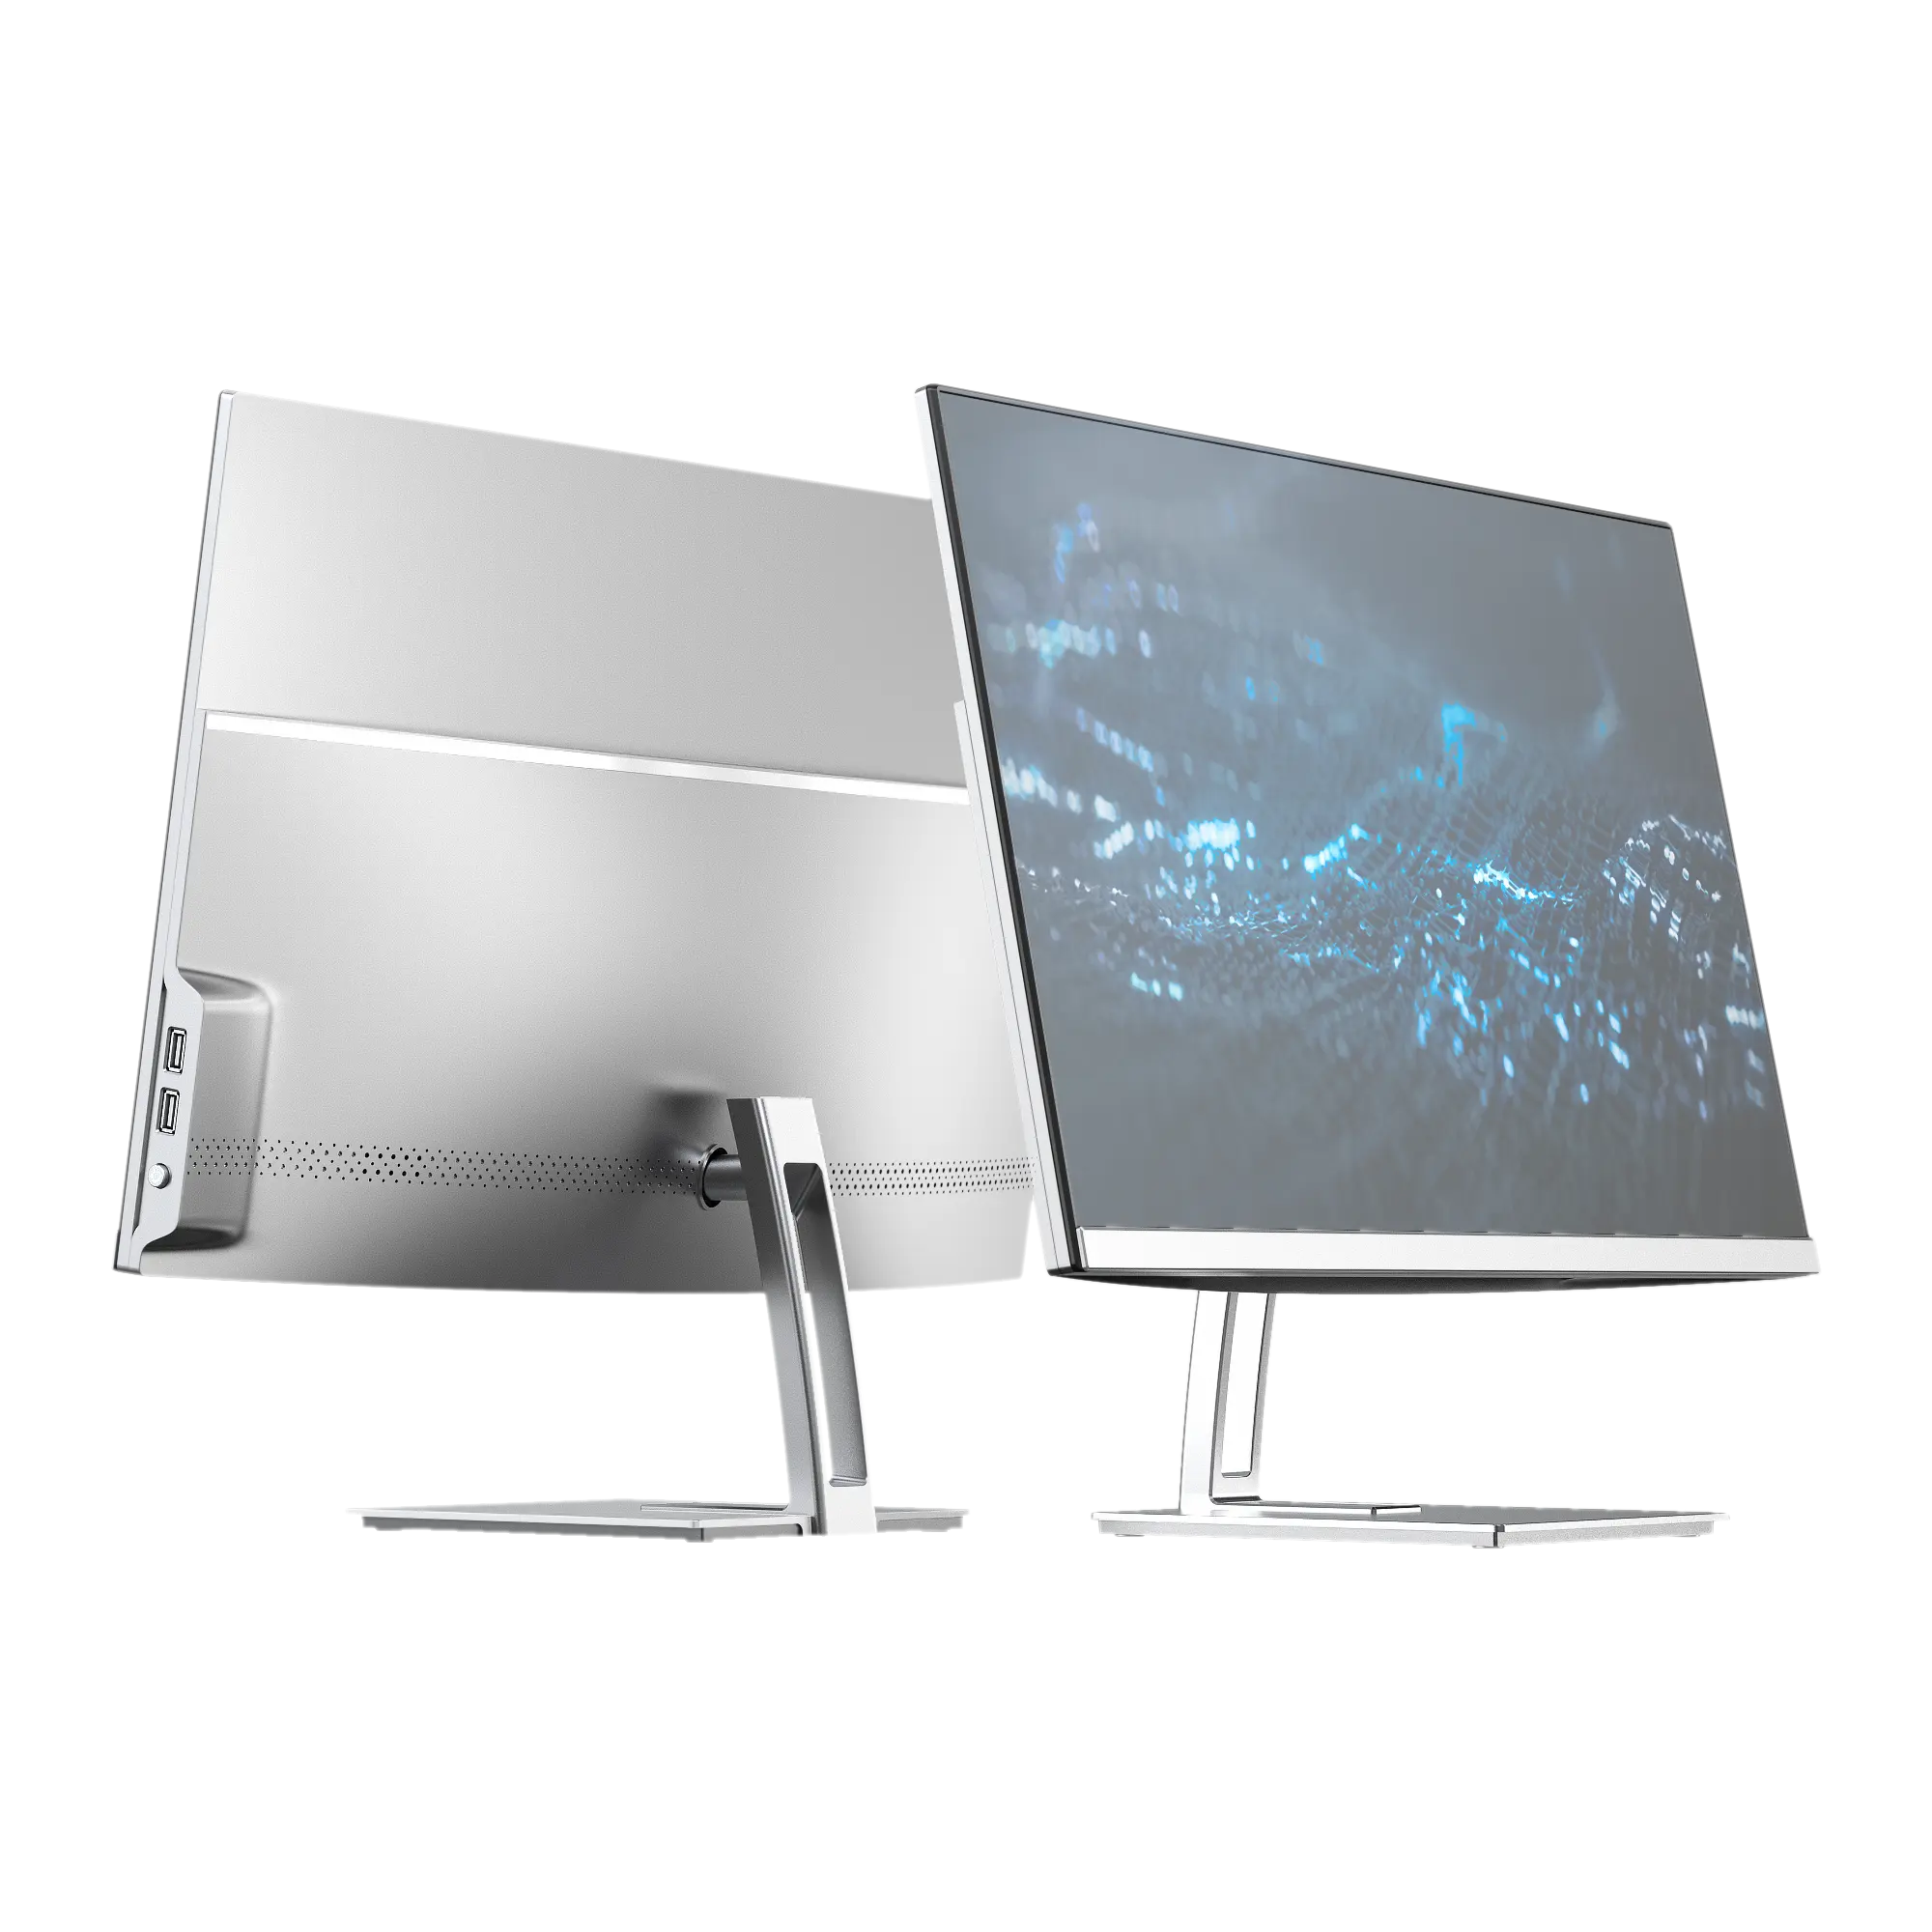 METAX OEM All-In-One PC Direct Factory SKD CKD Silver White Black Height Adjustable Barebone PIO all in a computer